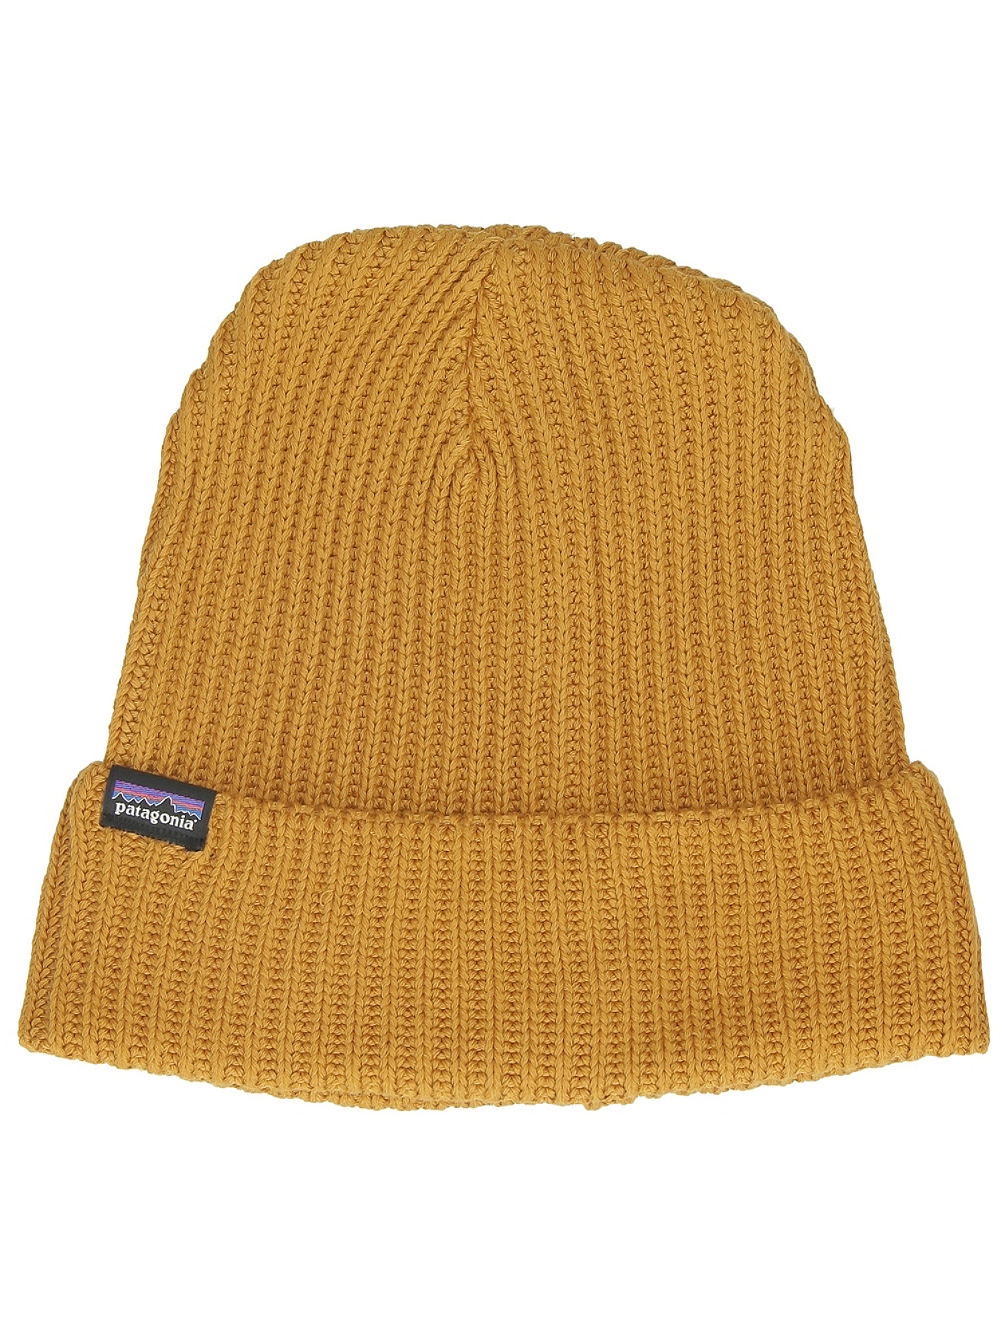 Fishermans Rolled Beanie